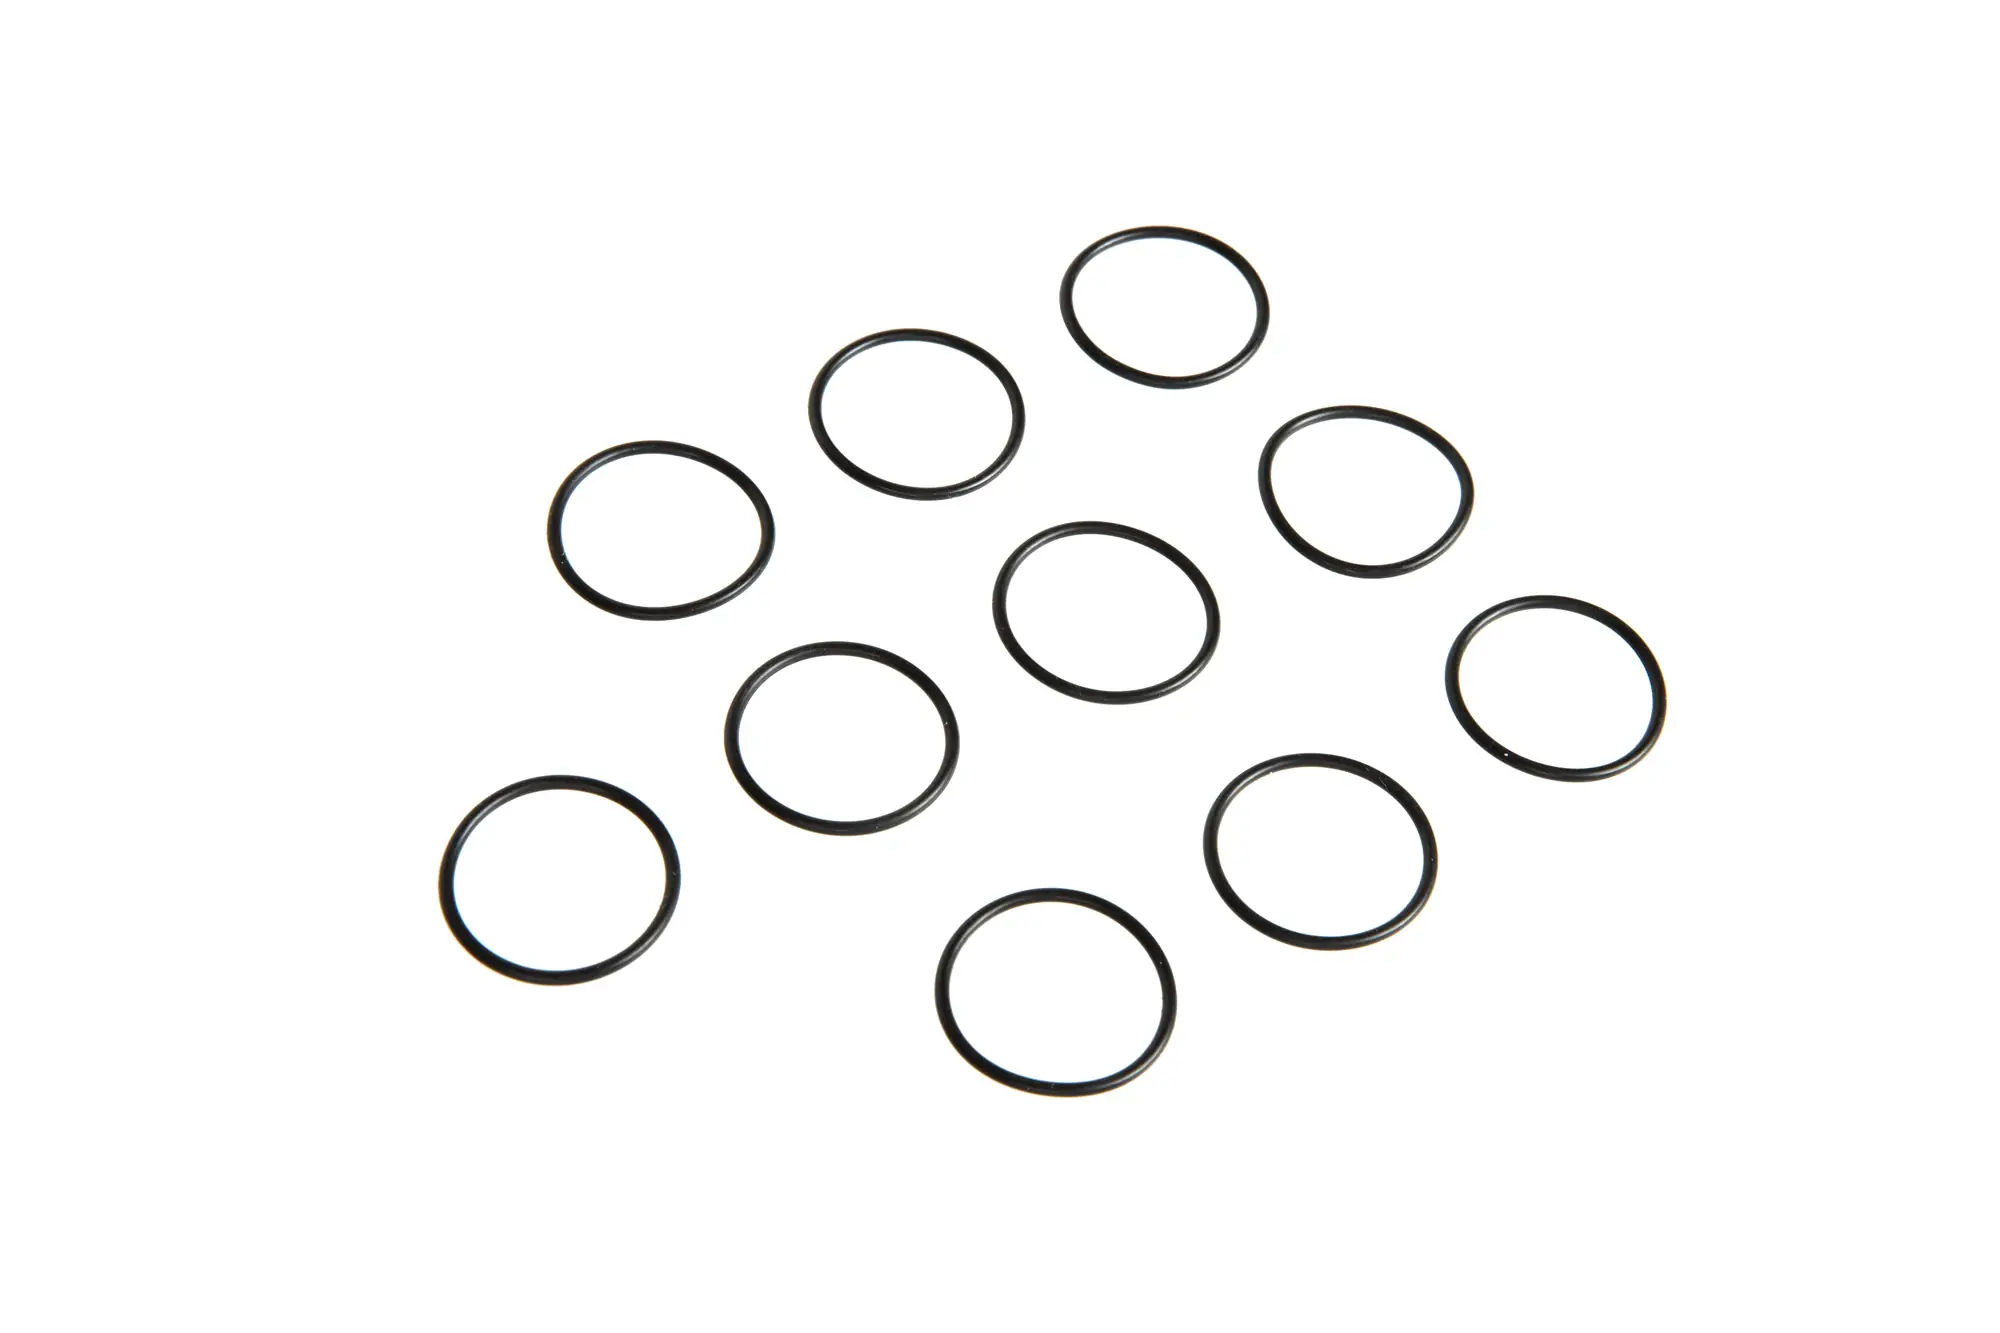 A set of spare gaskets for the cylinder head